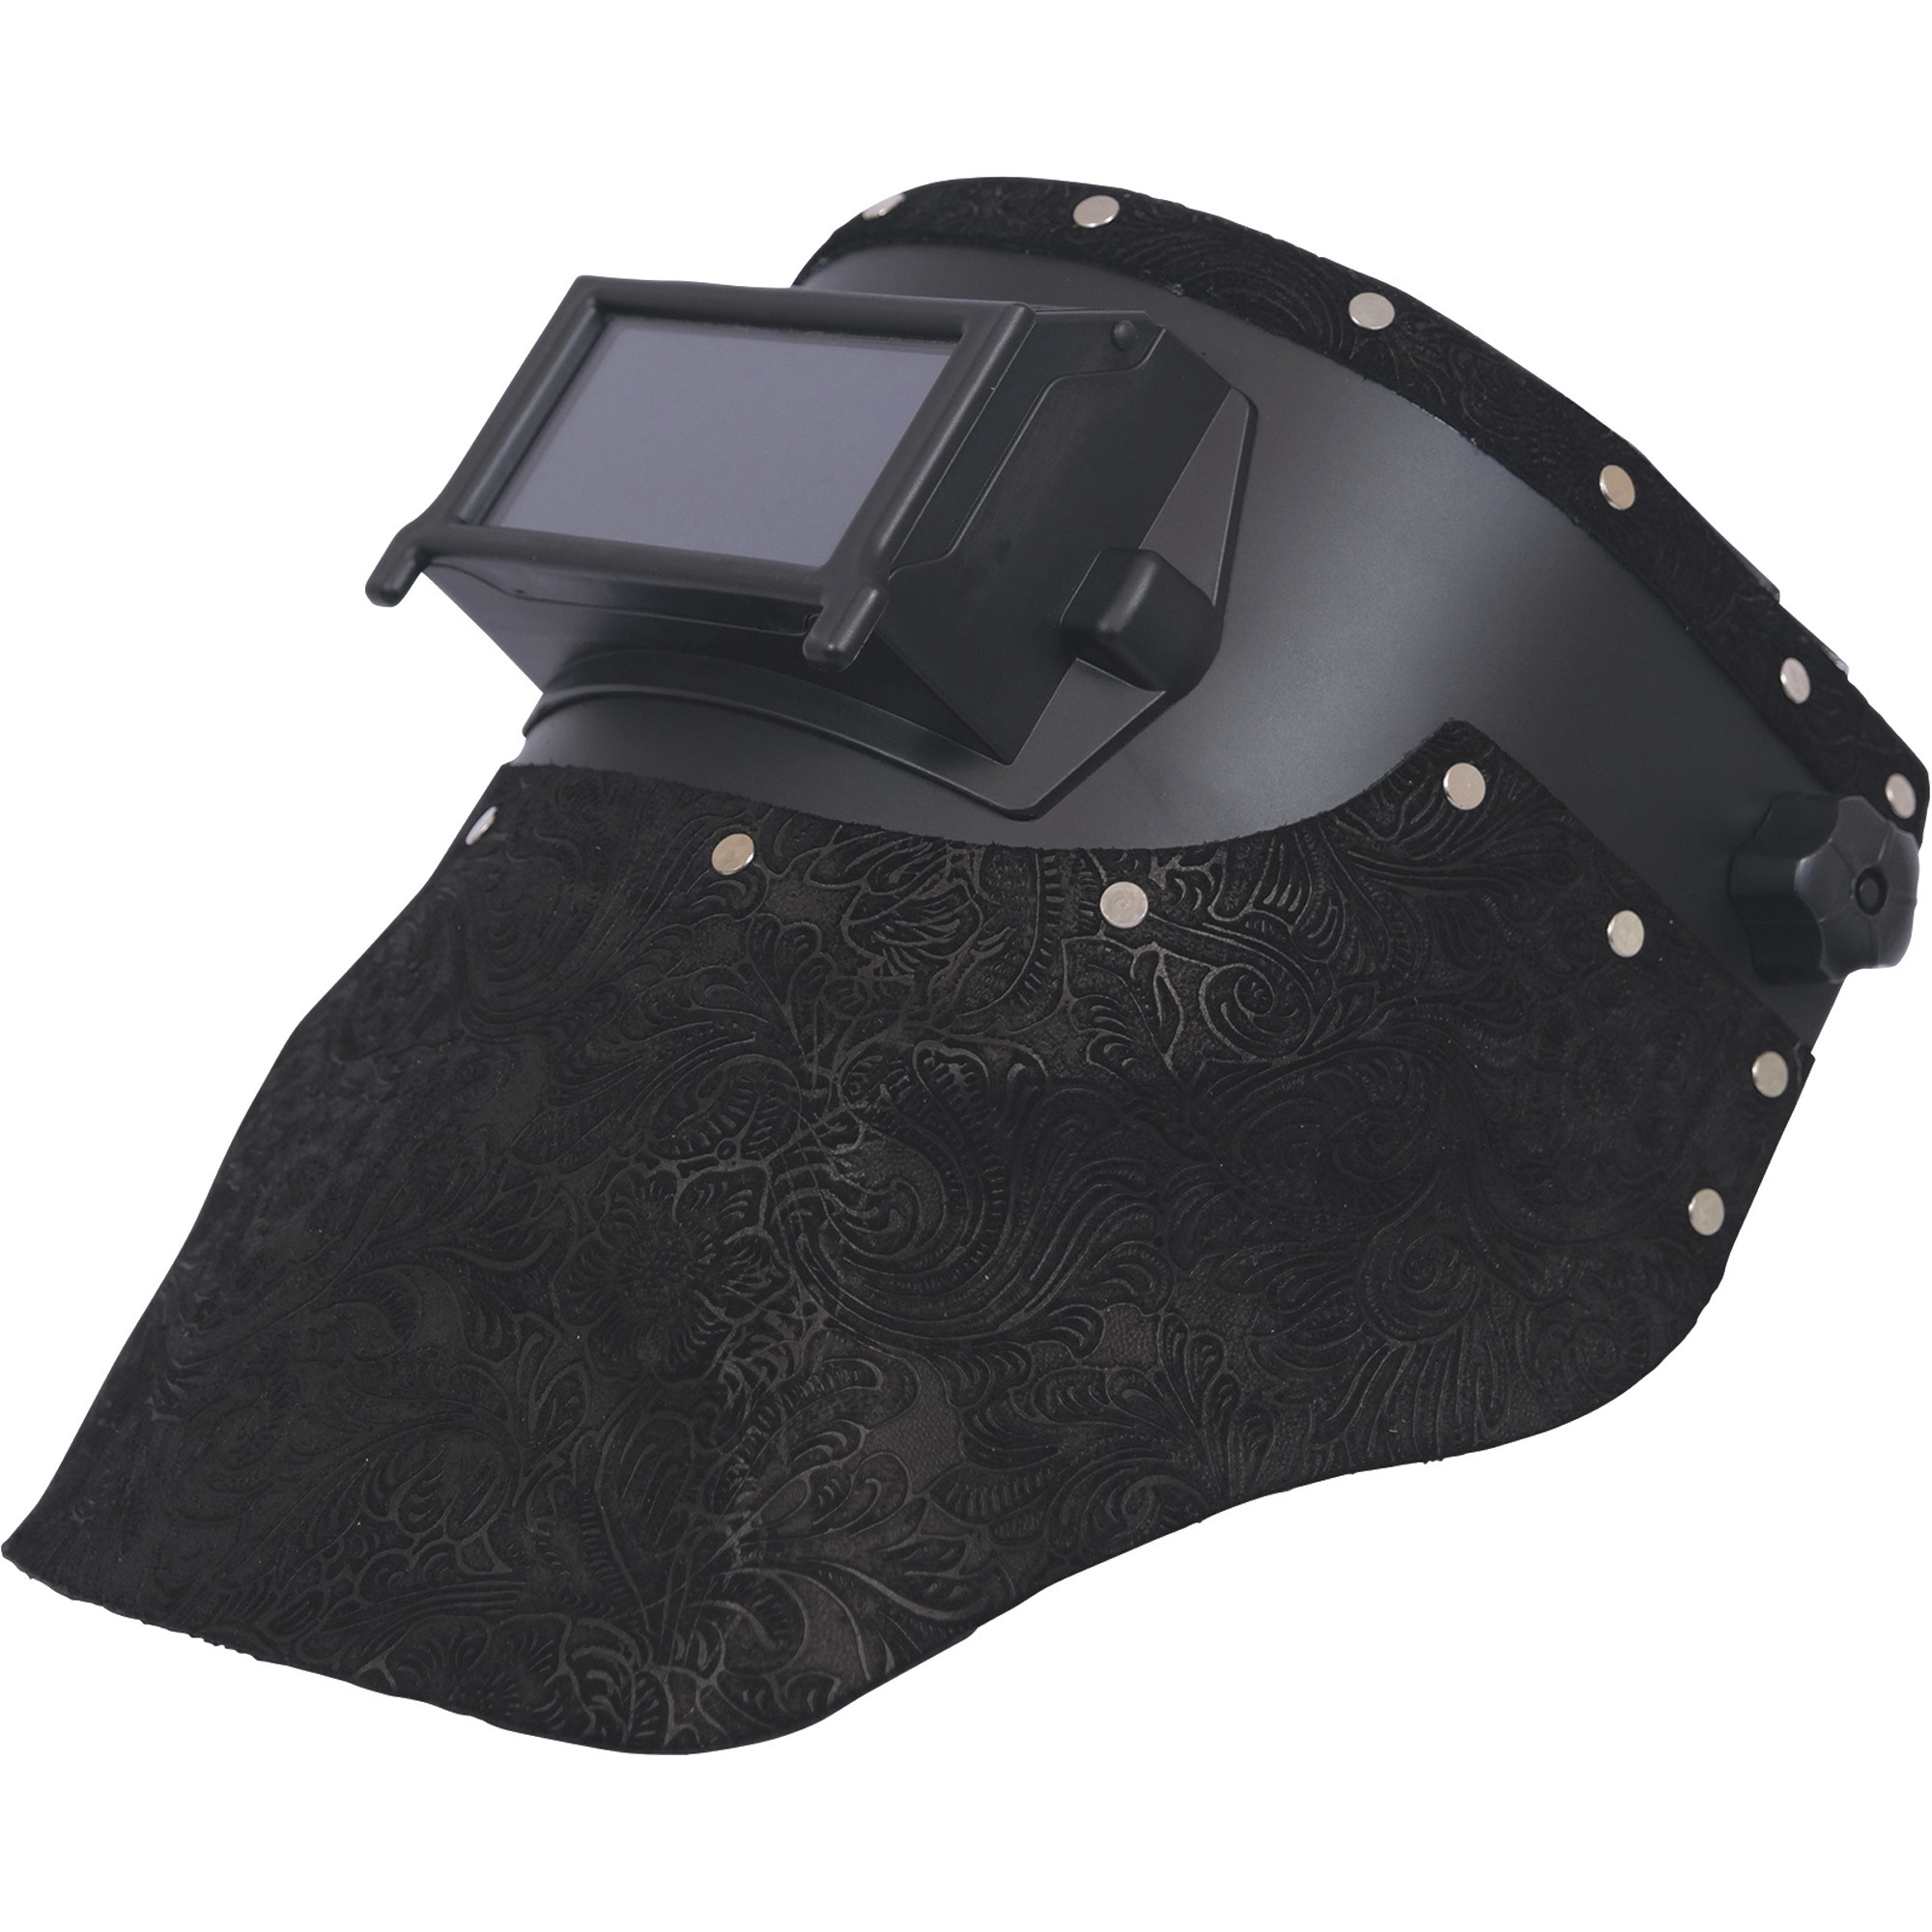 Outlaw Leather Welding Hood with Shade 10 â 2Inch x 4 1/4Inch Filter, Black Floral, Model OL-BFS-101